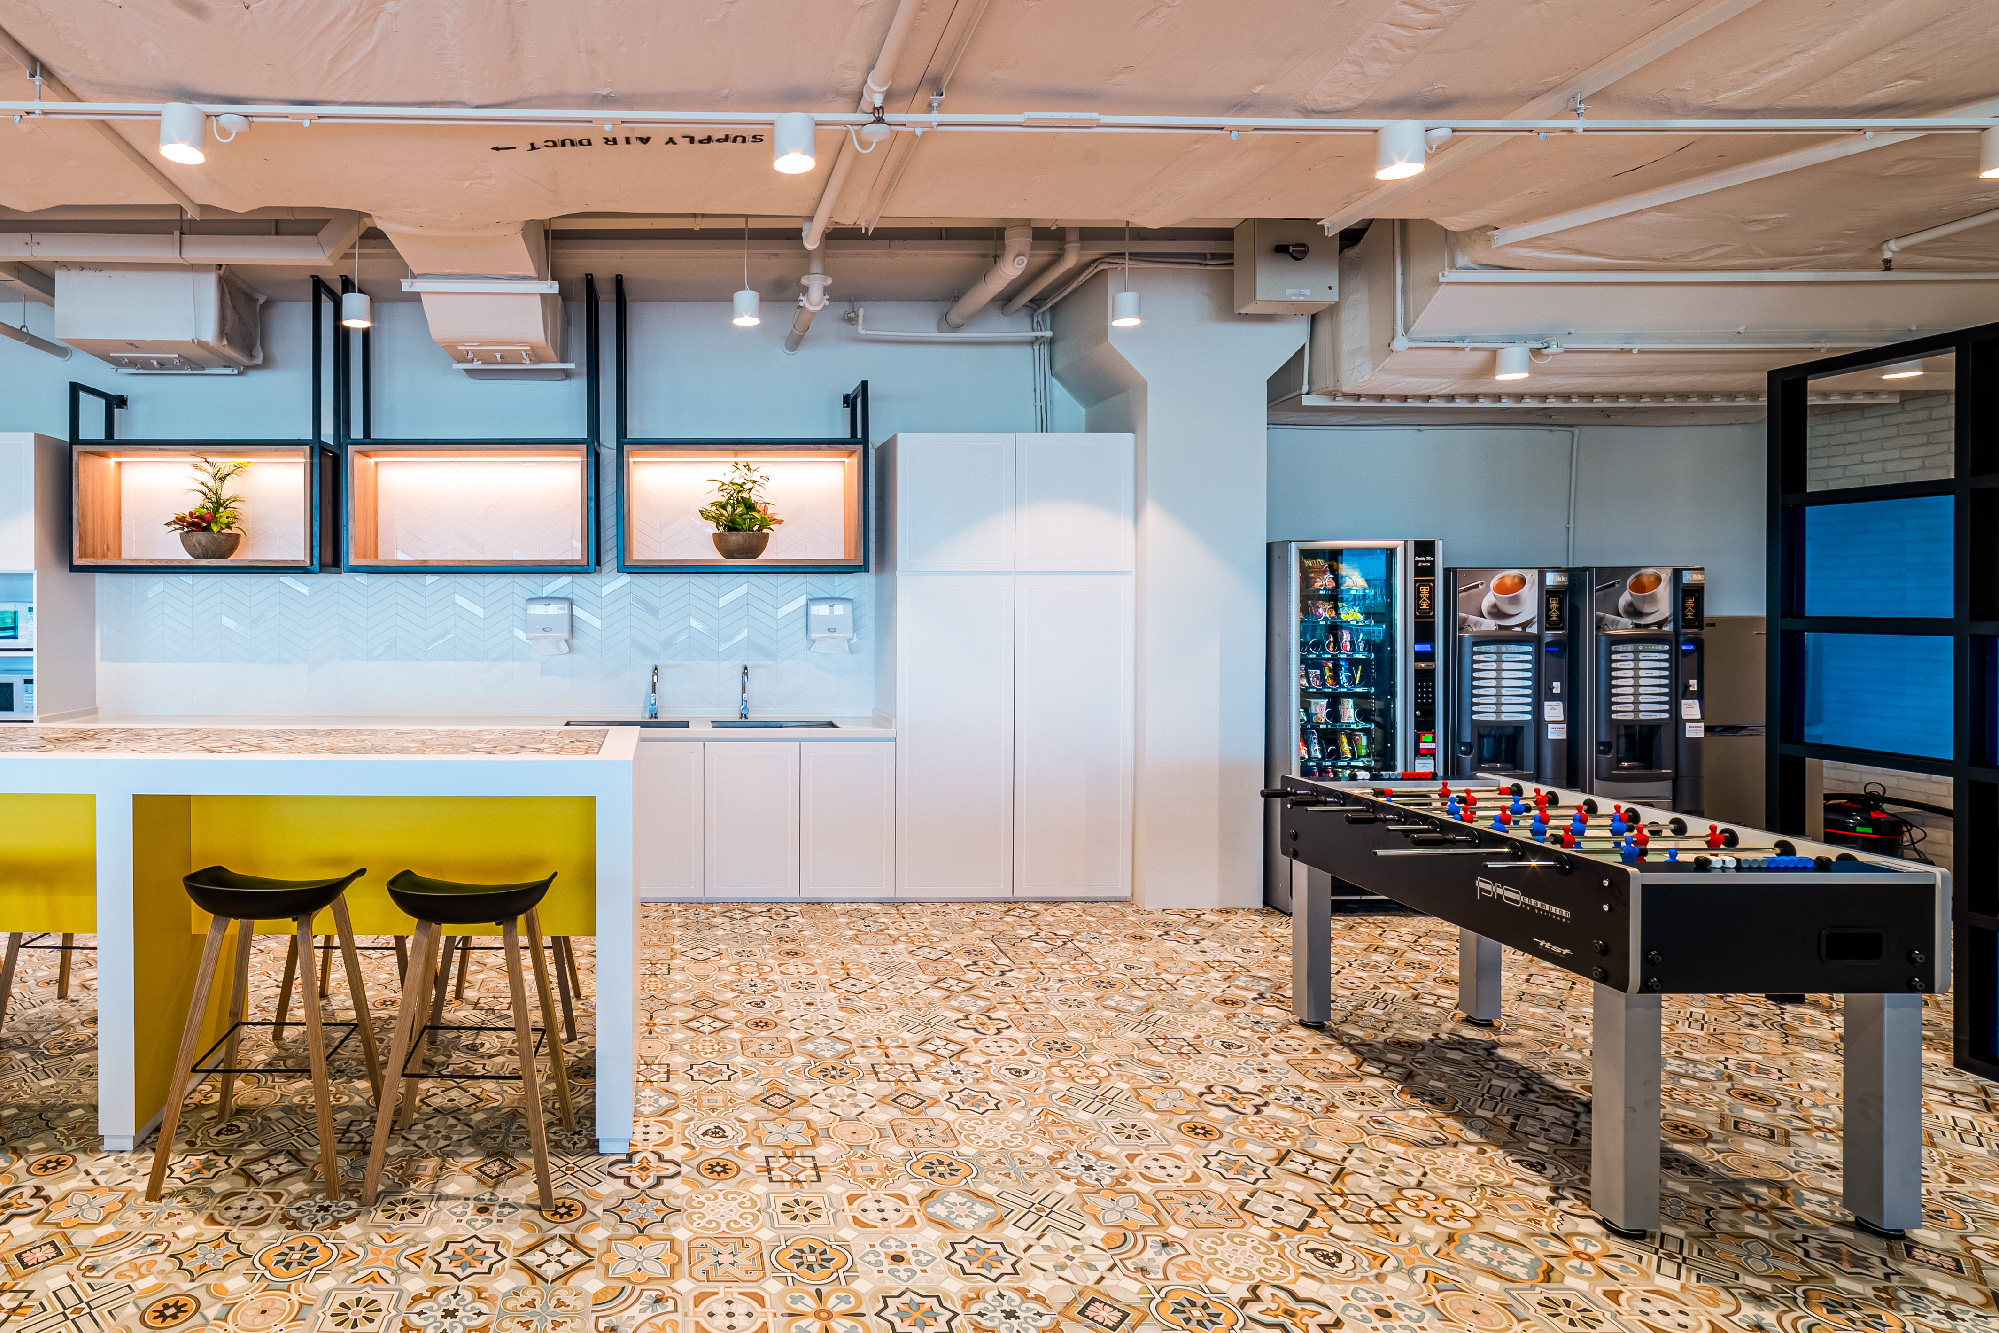 Azqore Singapore: workspace is inviting and comfortable, with areas for relaxation